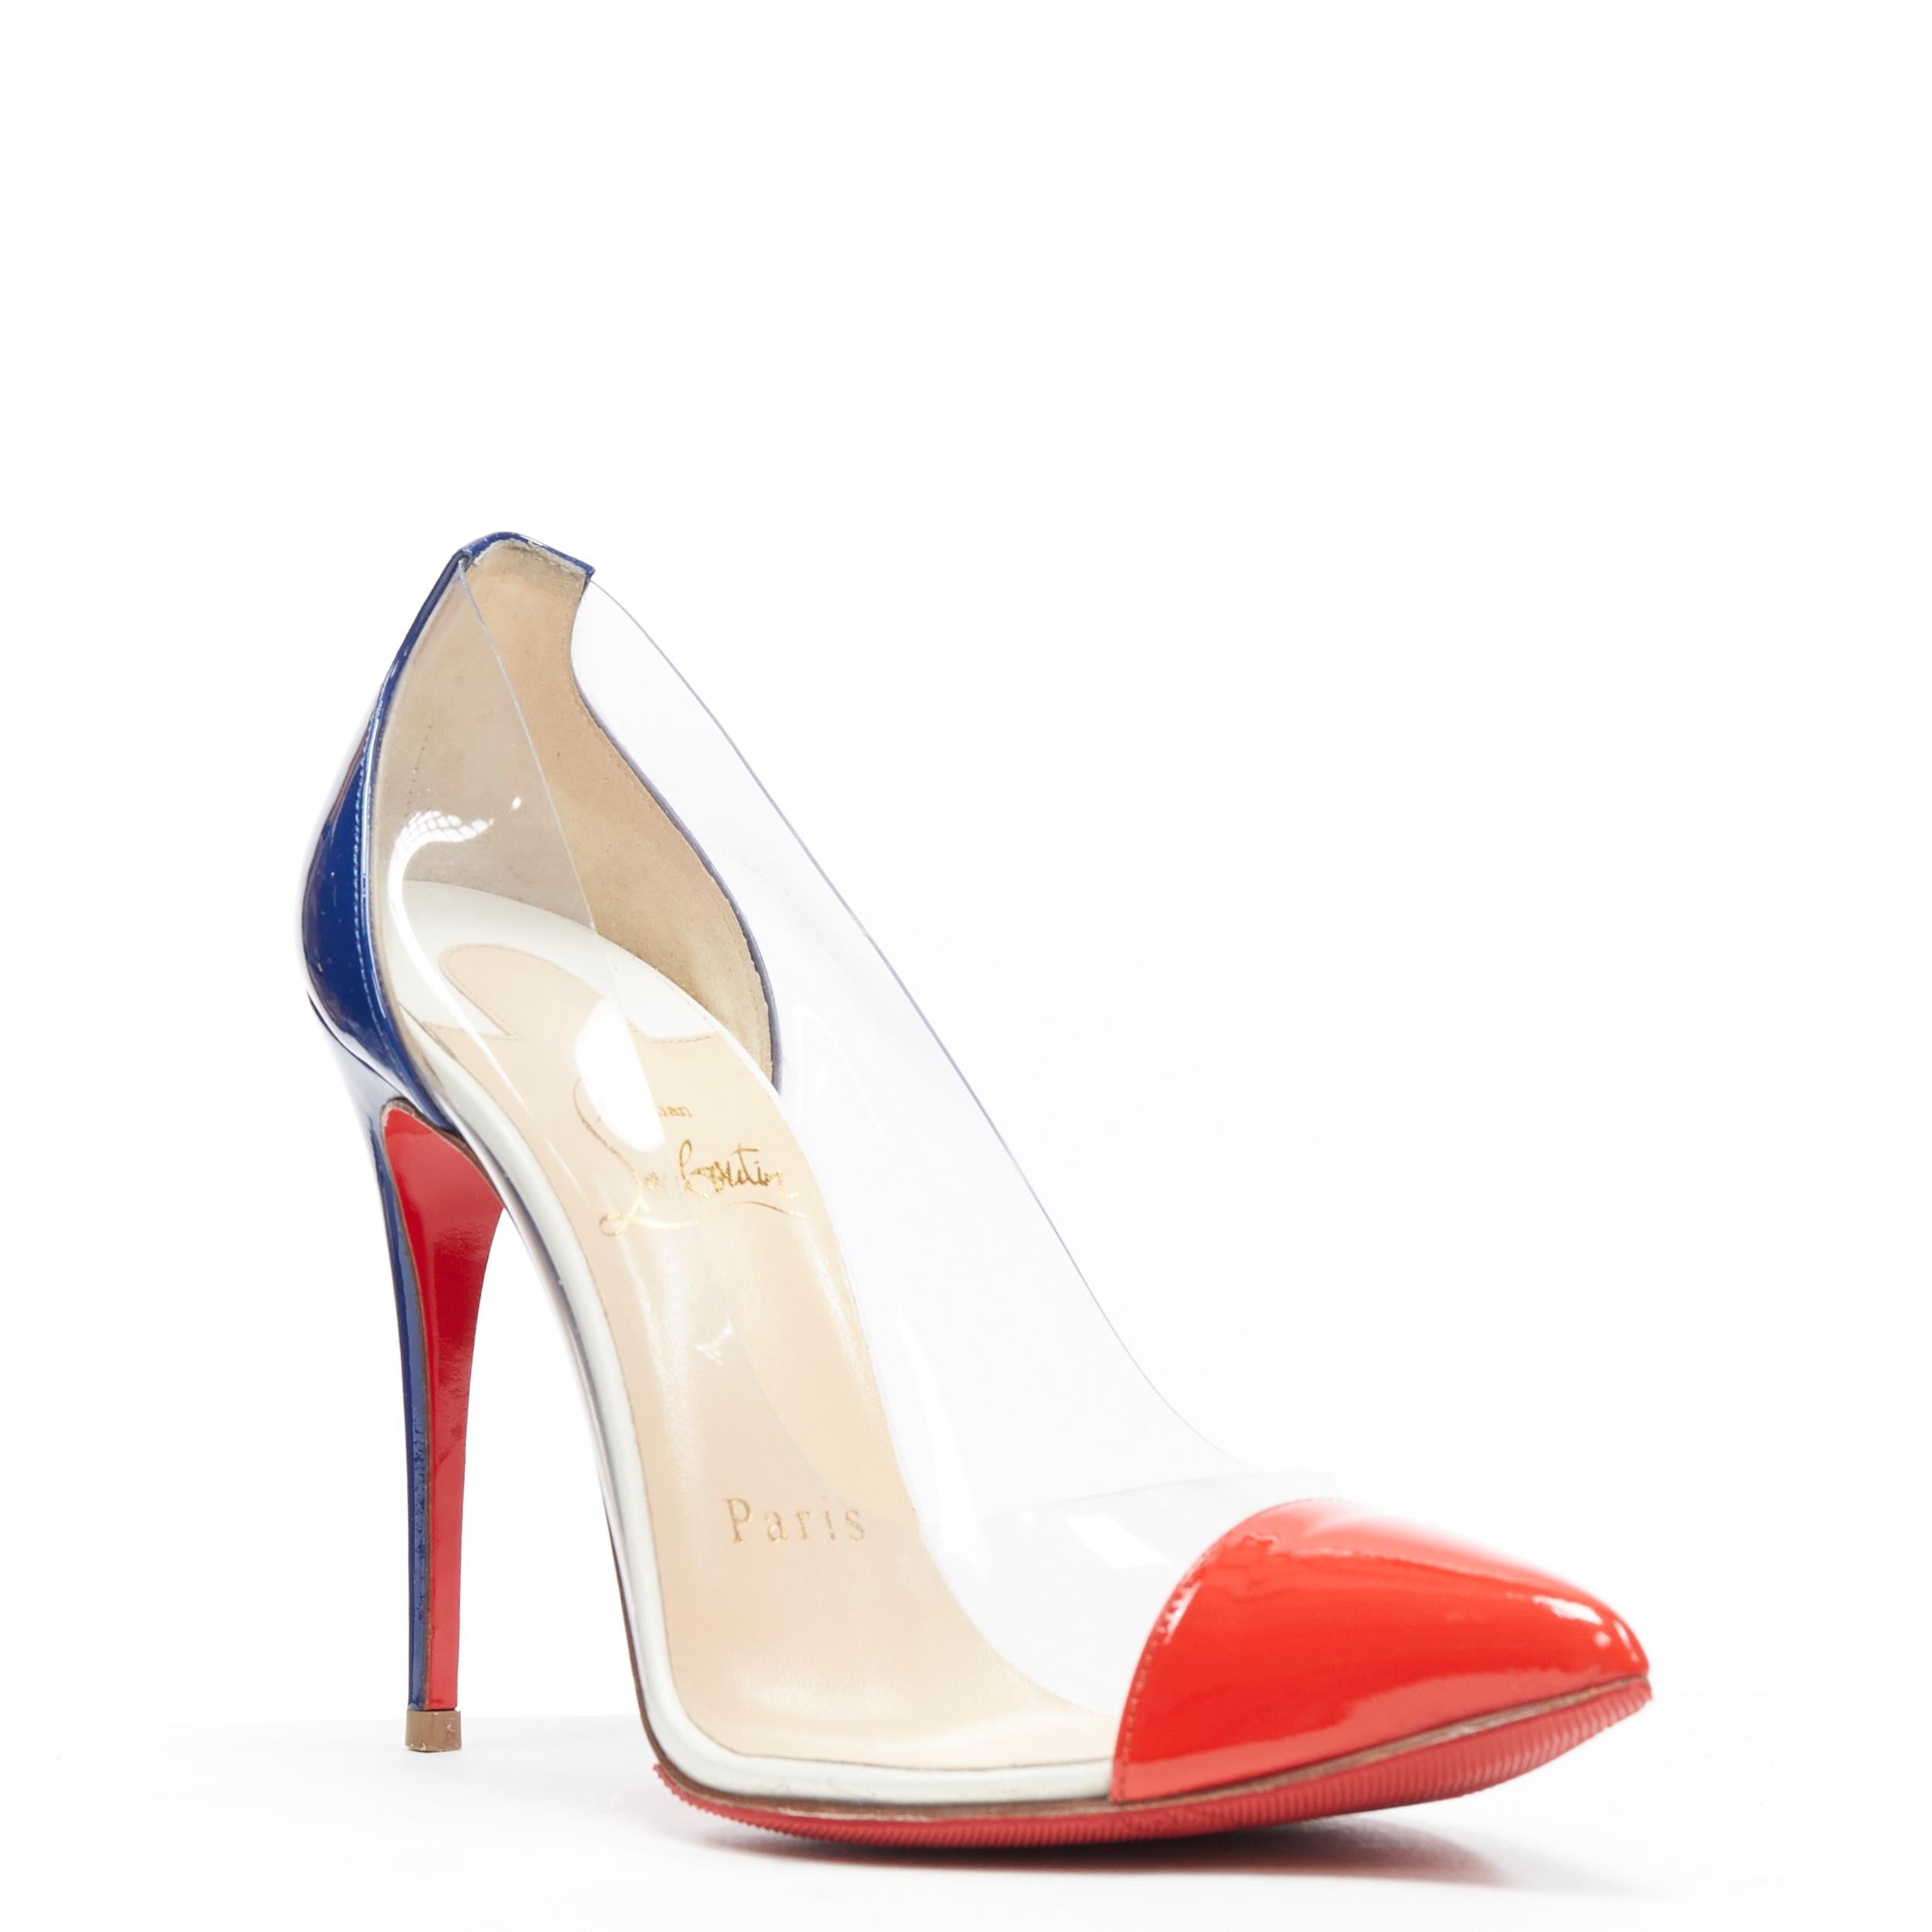 CHRISTIAN LOUBOUTIN Debout 100 red blue patent clear PVC point toe pump EU35.5
Brand: Christian Louboutin
Designer: Christian Louboutin
Model Name / Style: Debout 100
Material: Patent leather
Color: Blue, red
Pattern: Solid
Extra Detail: High (3-3.9